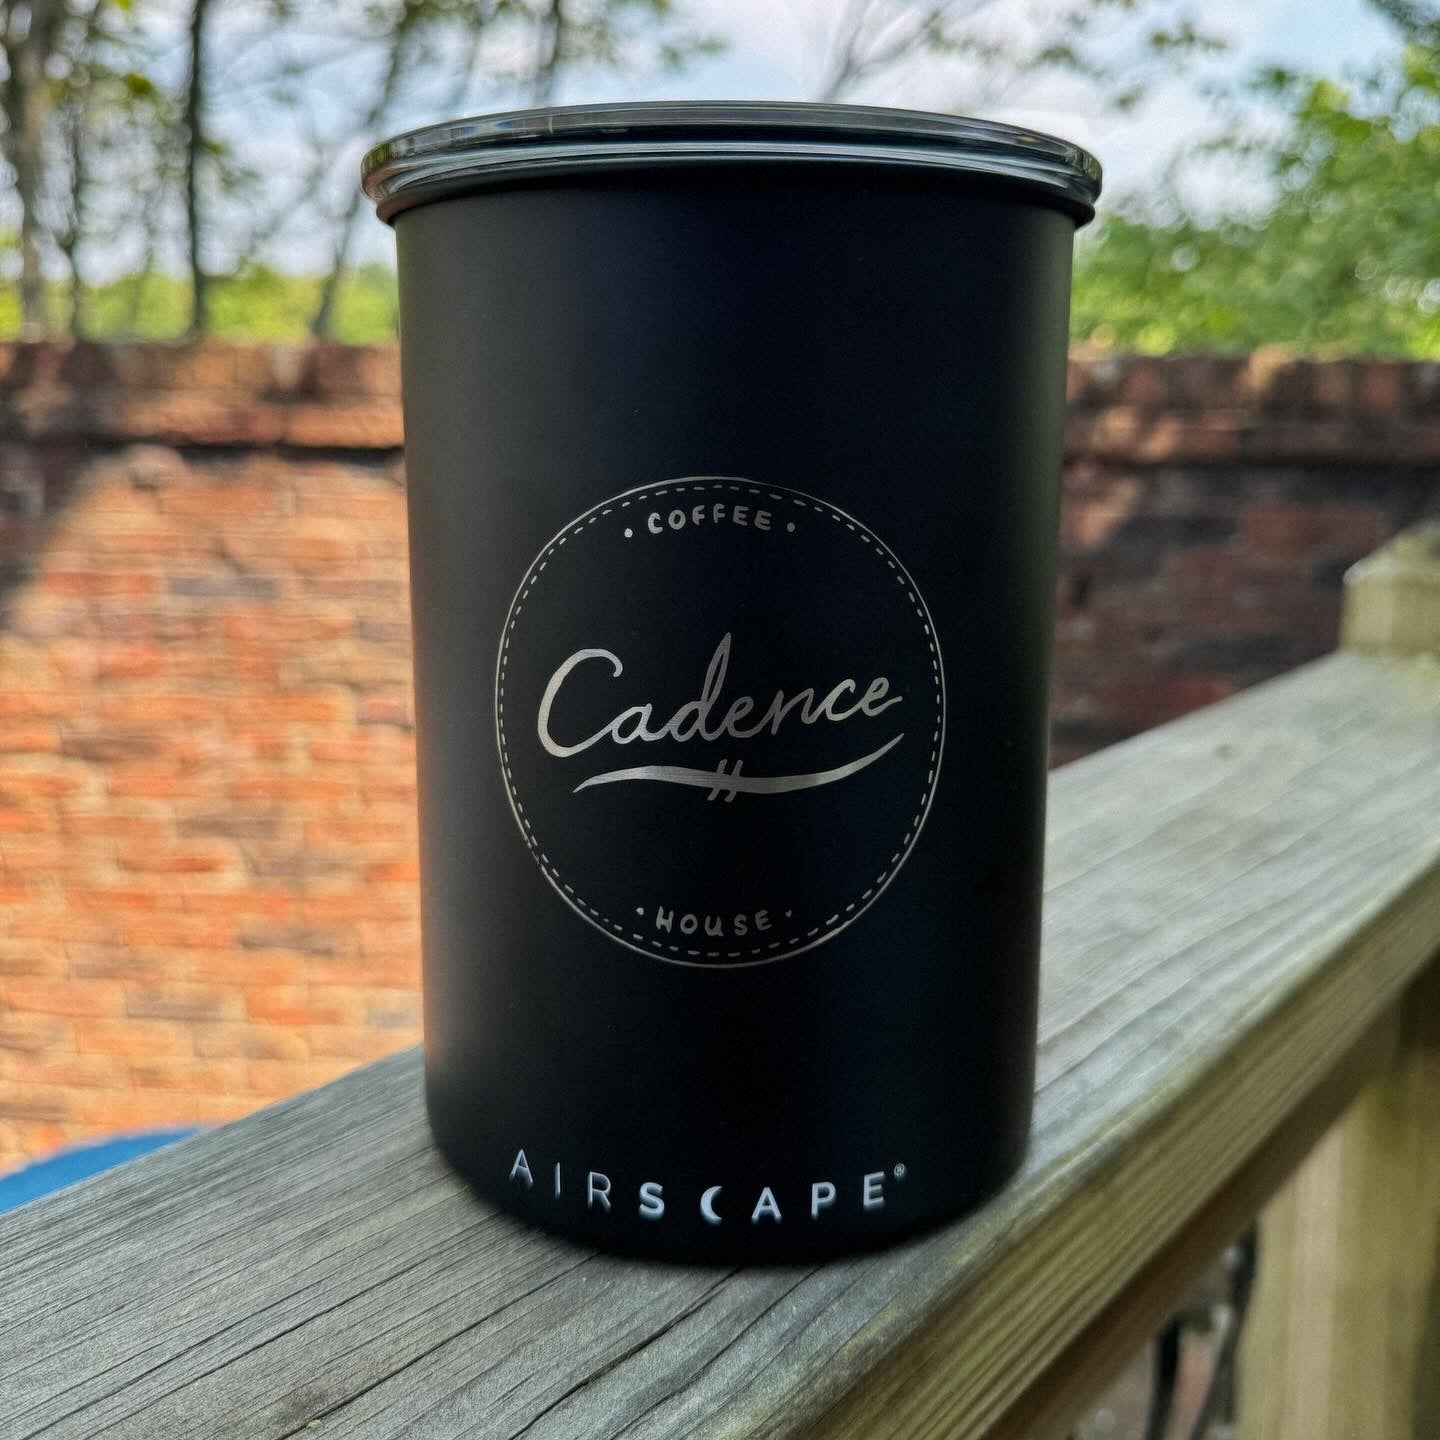 Airscape Coffee Canister - Mayfly Coffee